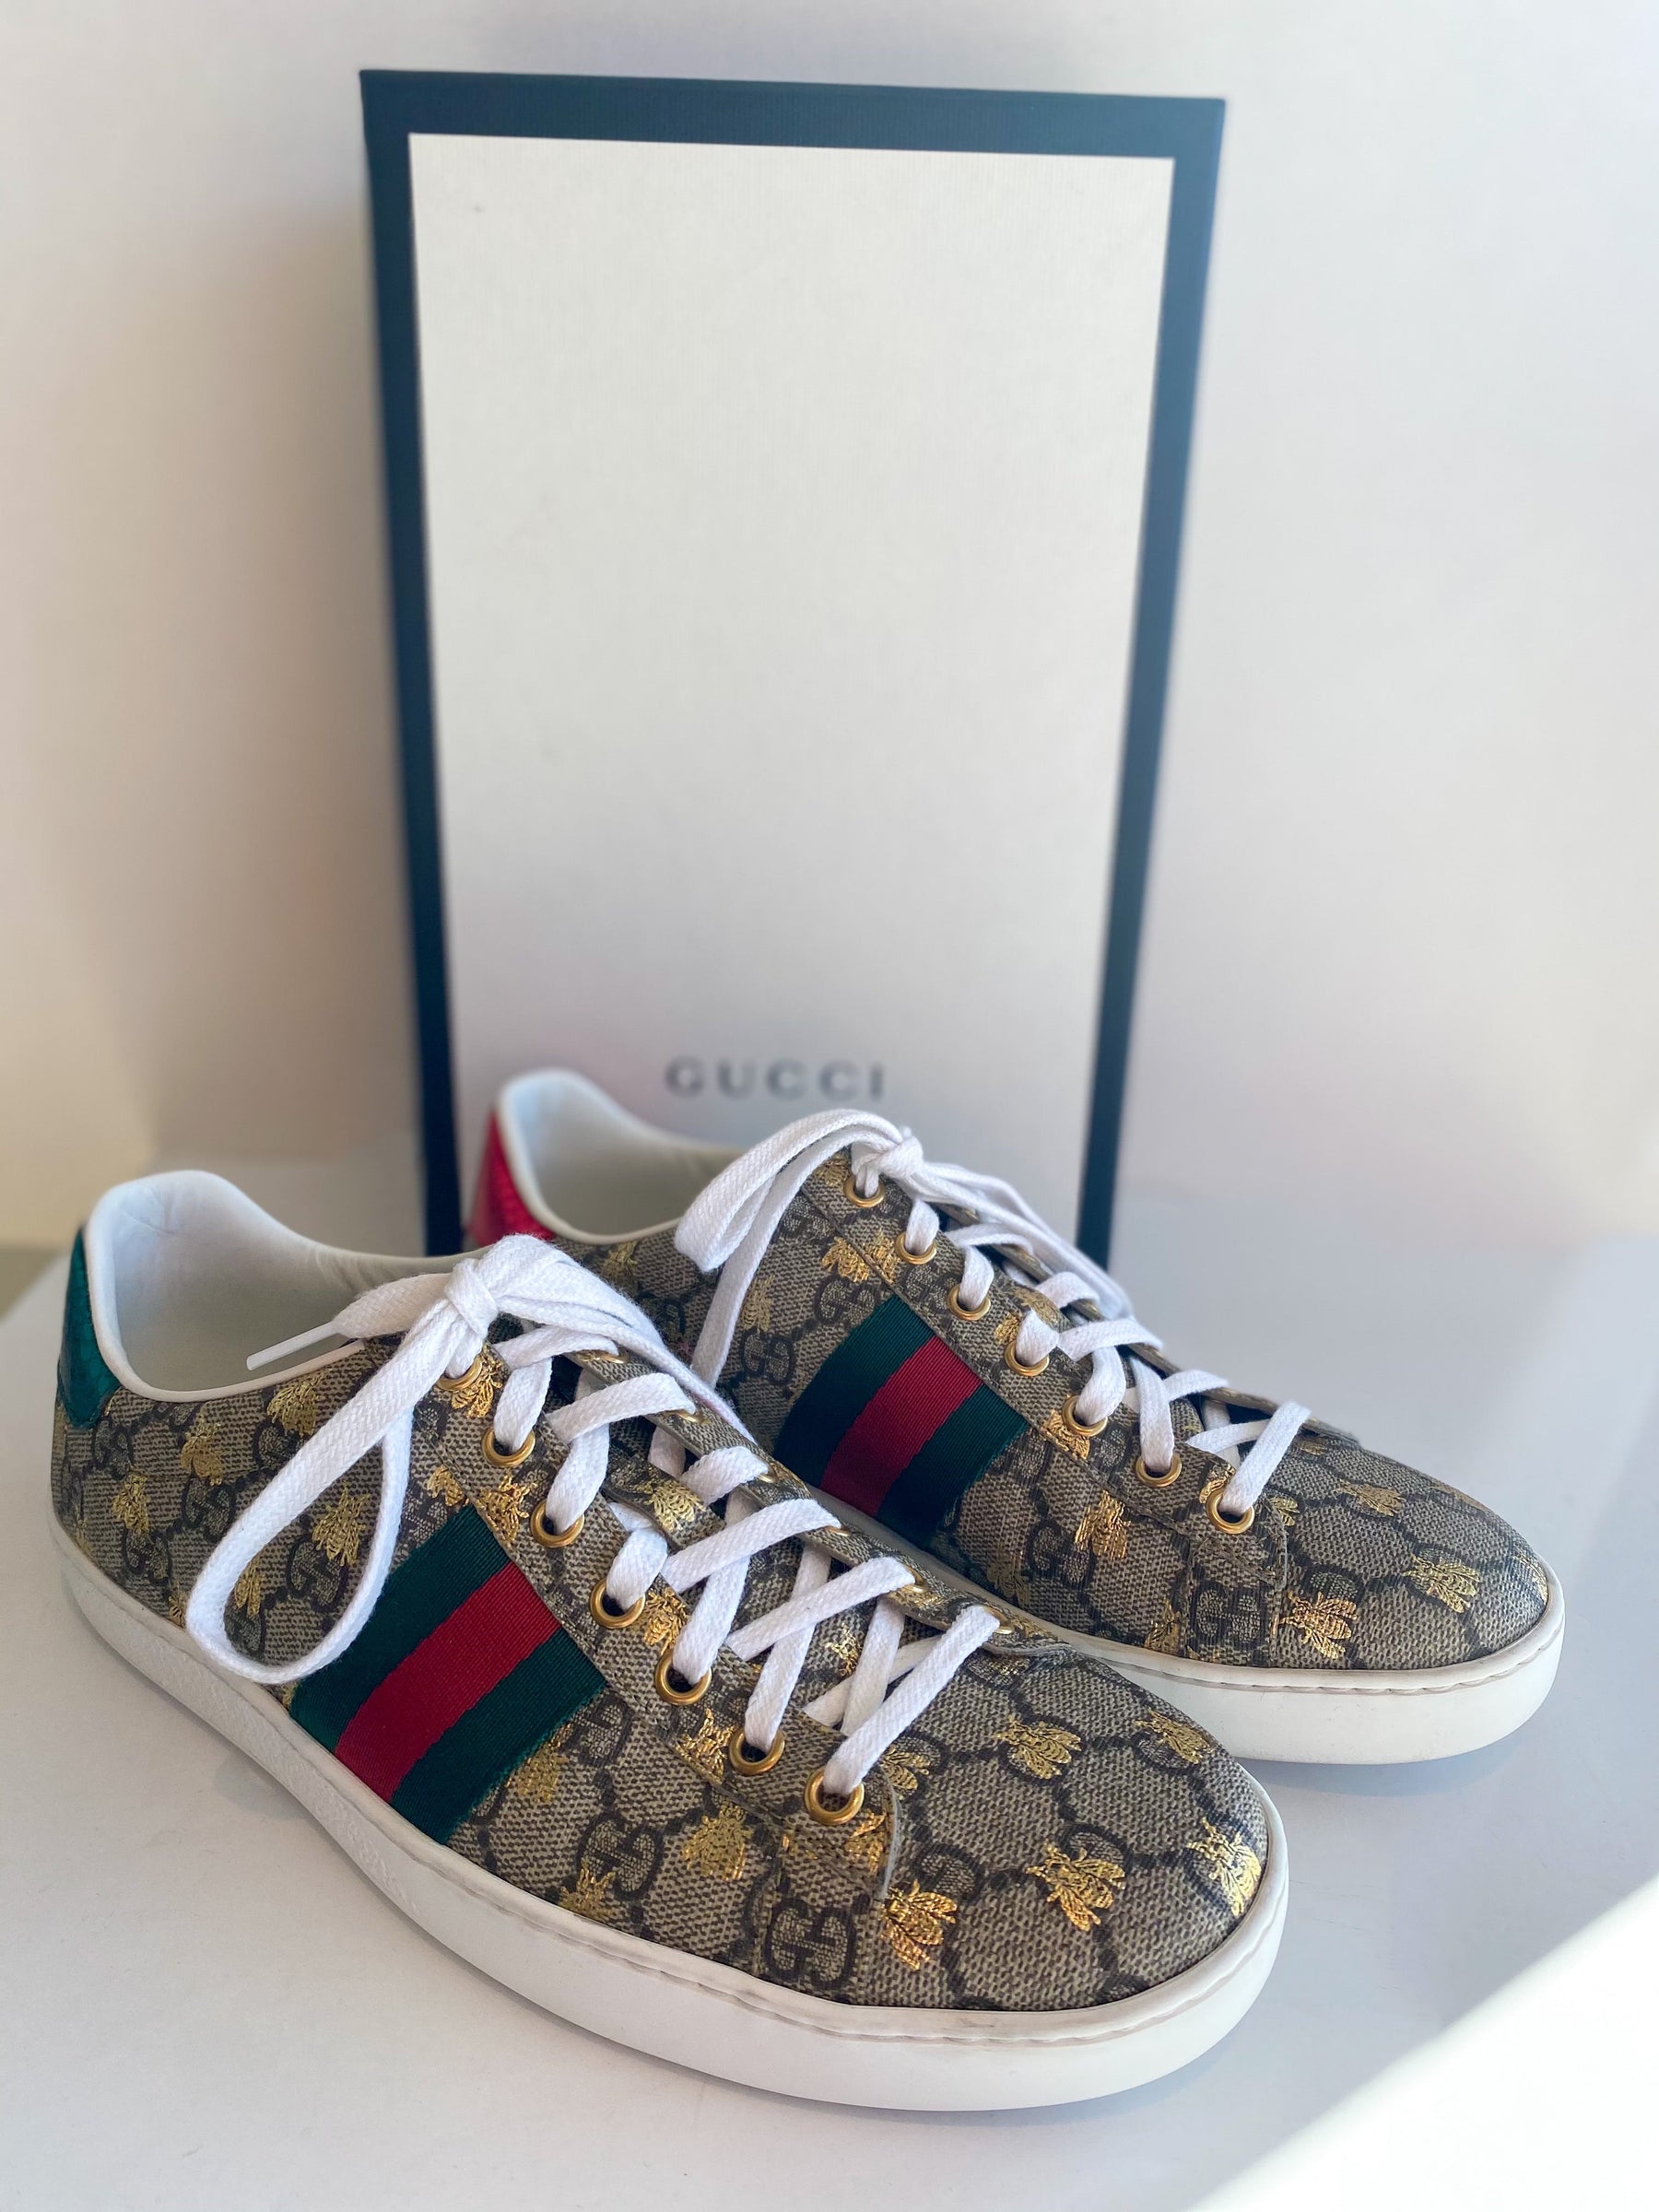 Gucci Ace GG Supreme with Bees Sneaker